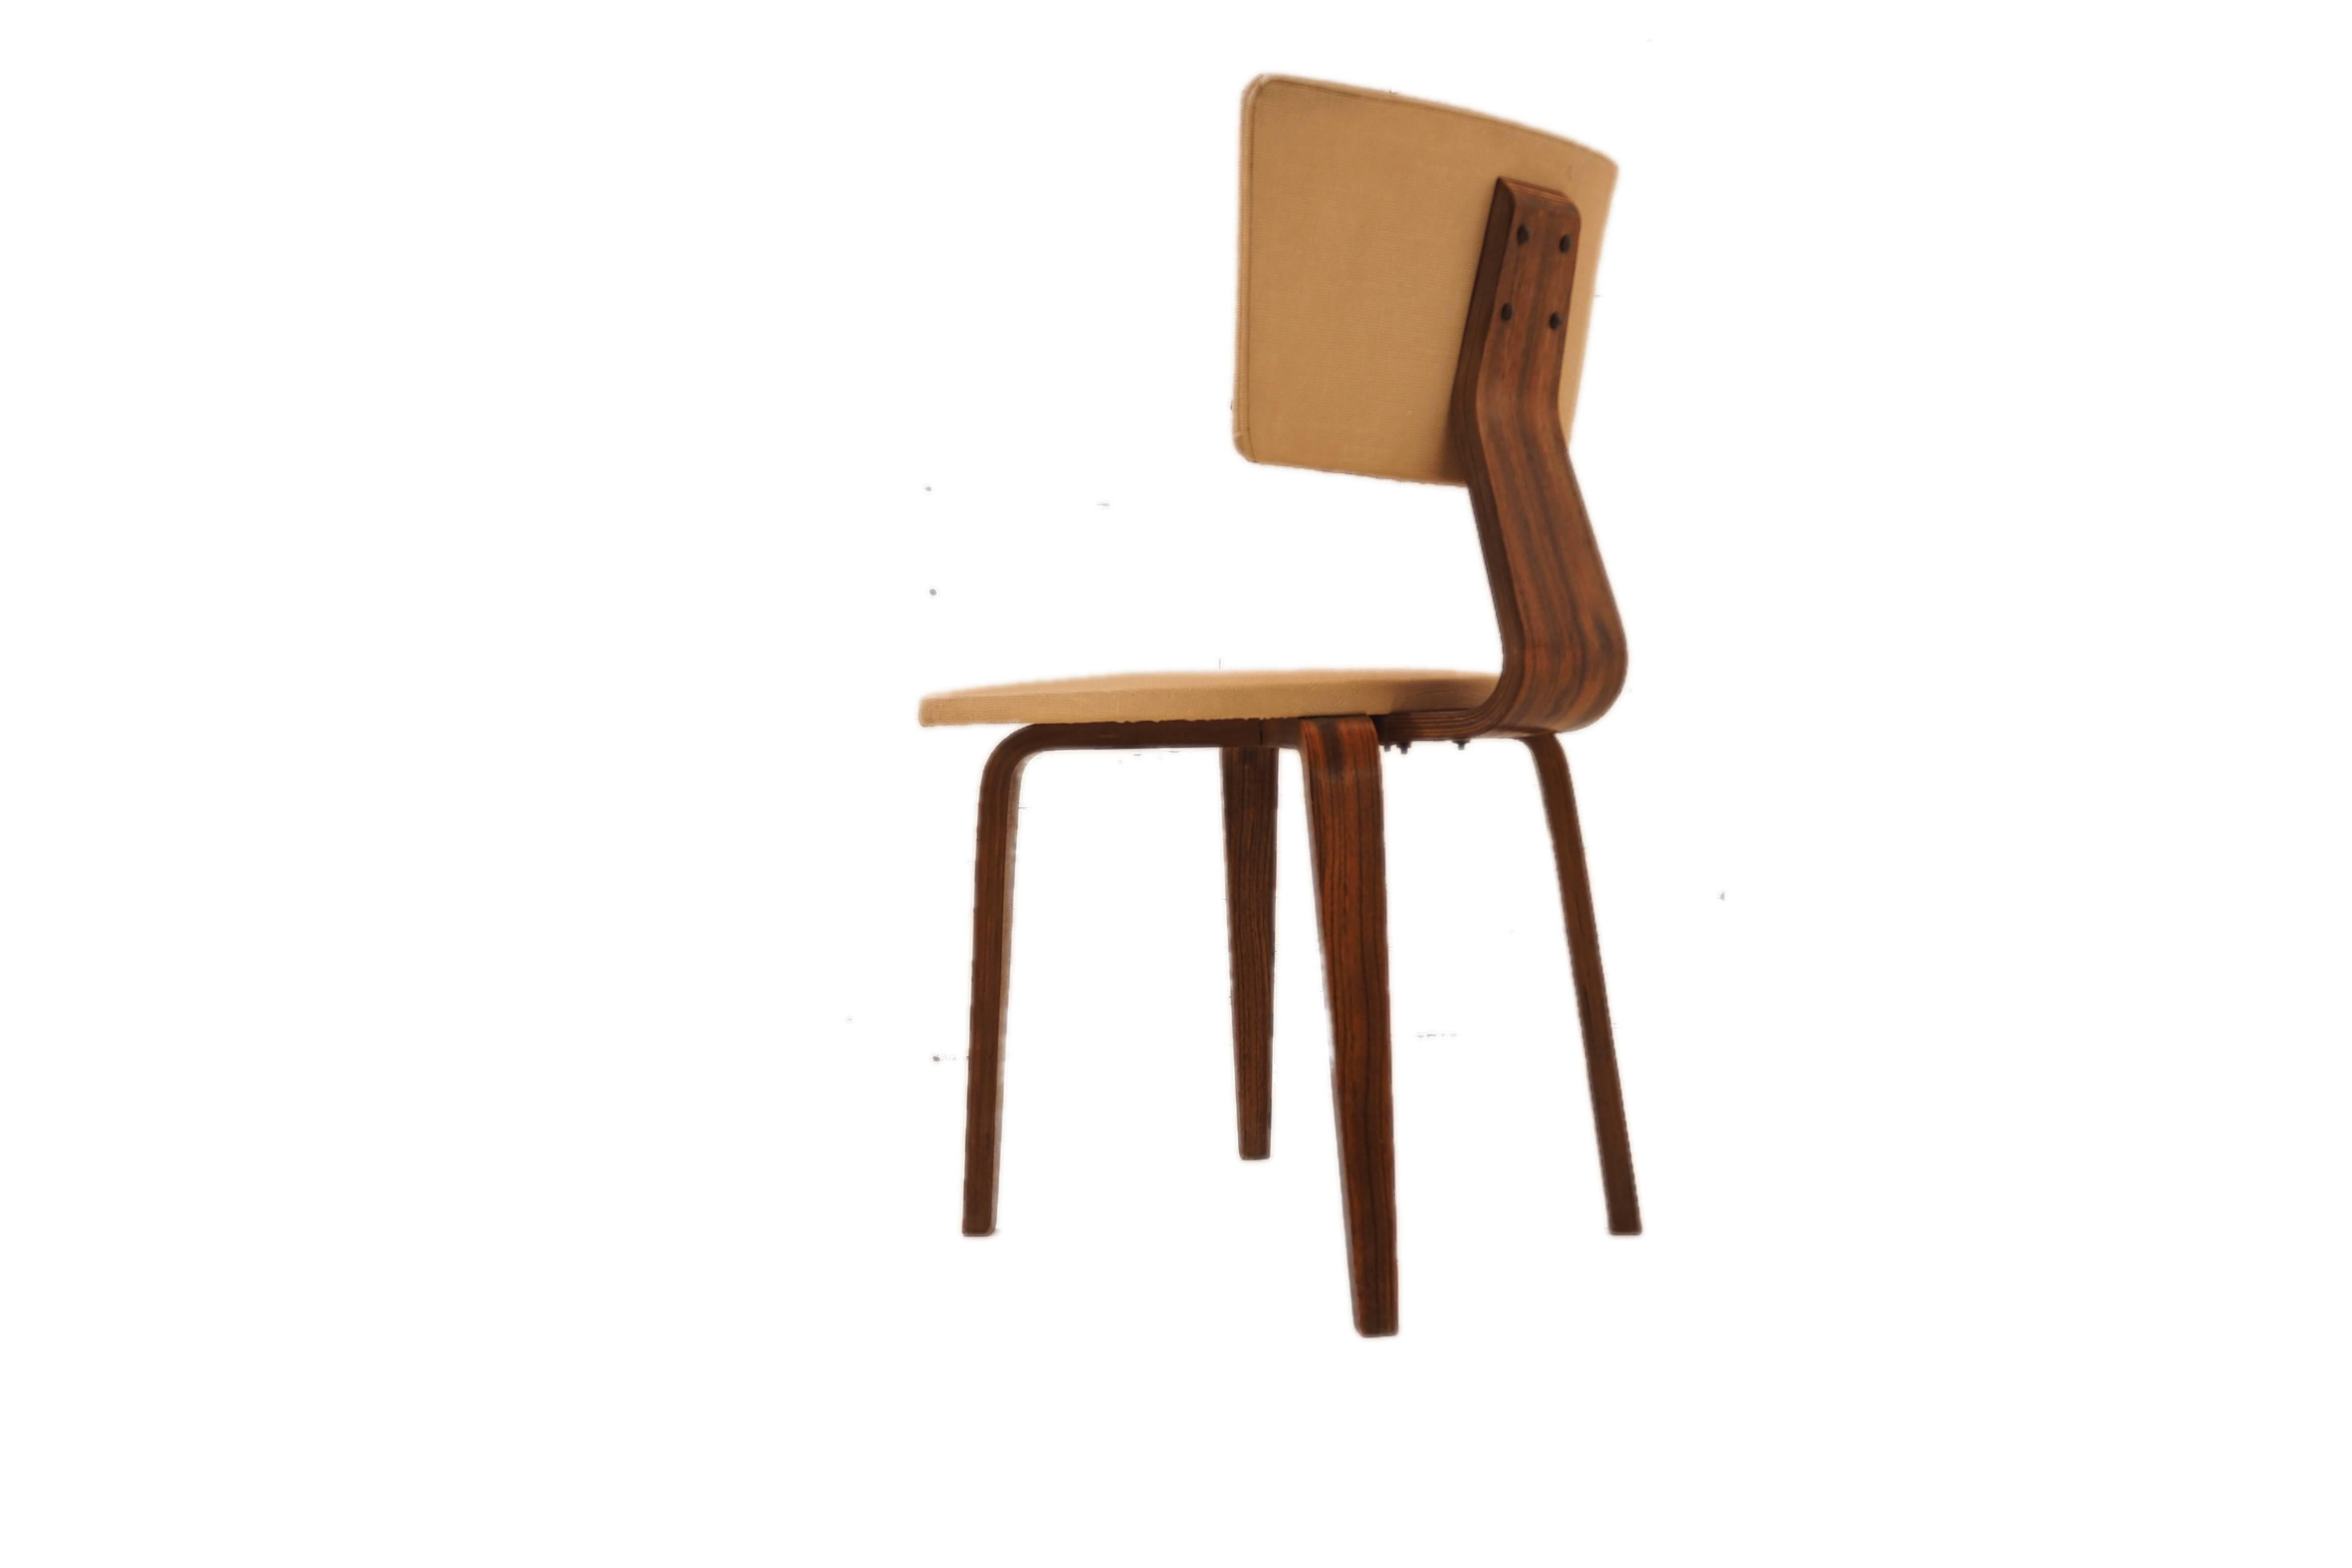 A legendary Dutch design Classic, this set of four dining chairs designed by Cor Alons and J.C. Jansen. The chairs were designed for C. den Boer Meubelfabrieken, Gouda Holland in 1949.Fabricated in birch and come with the original brown or white